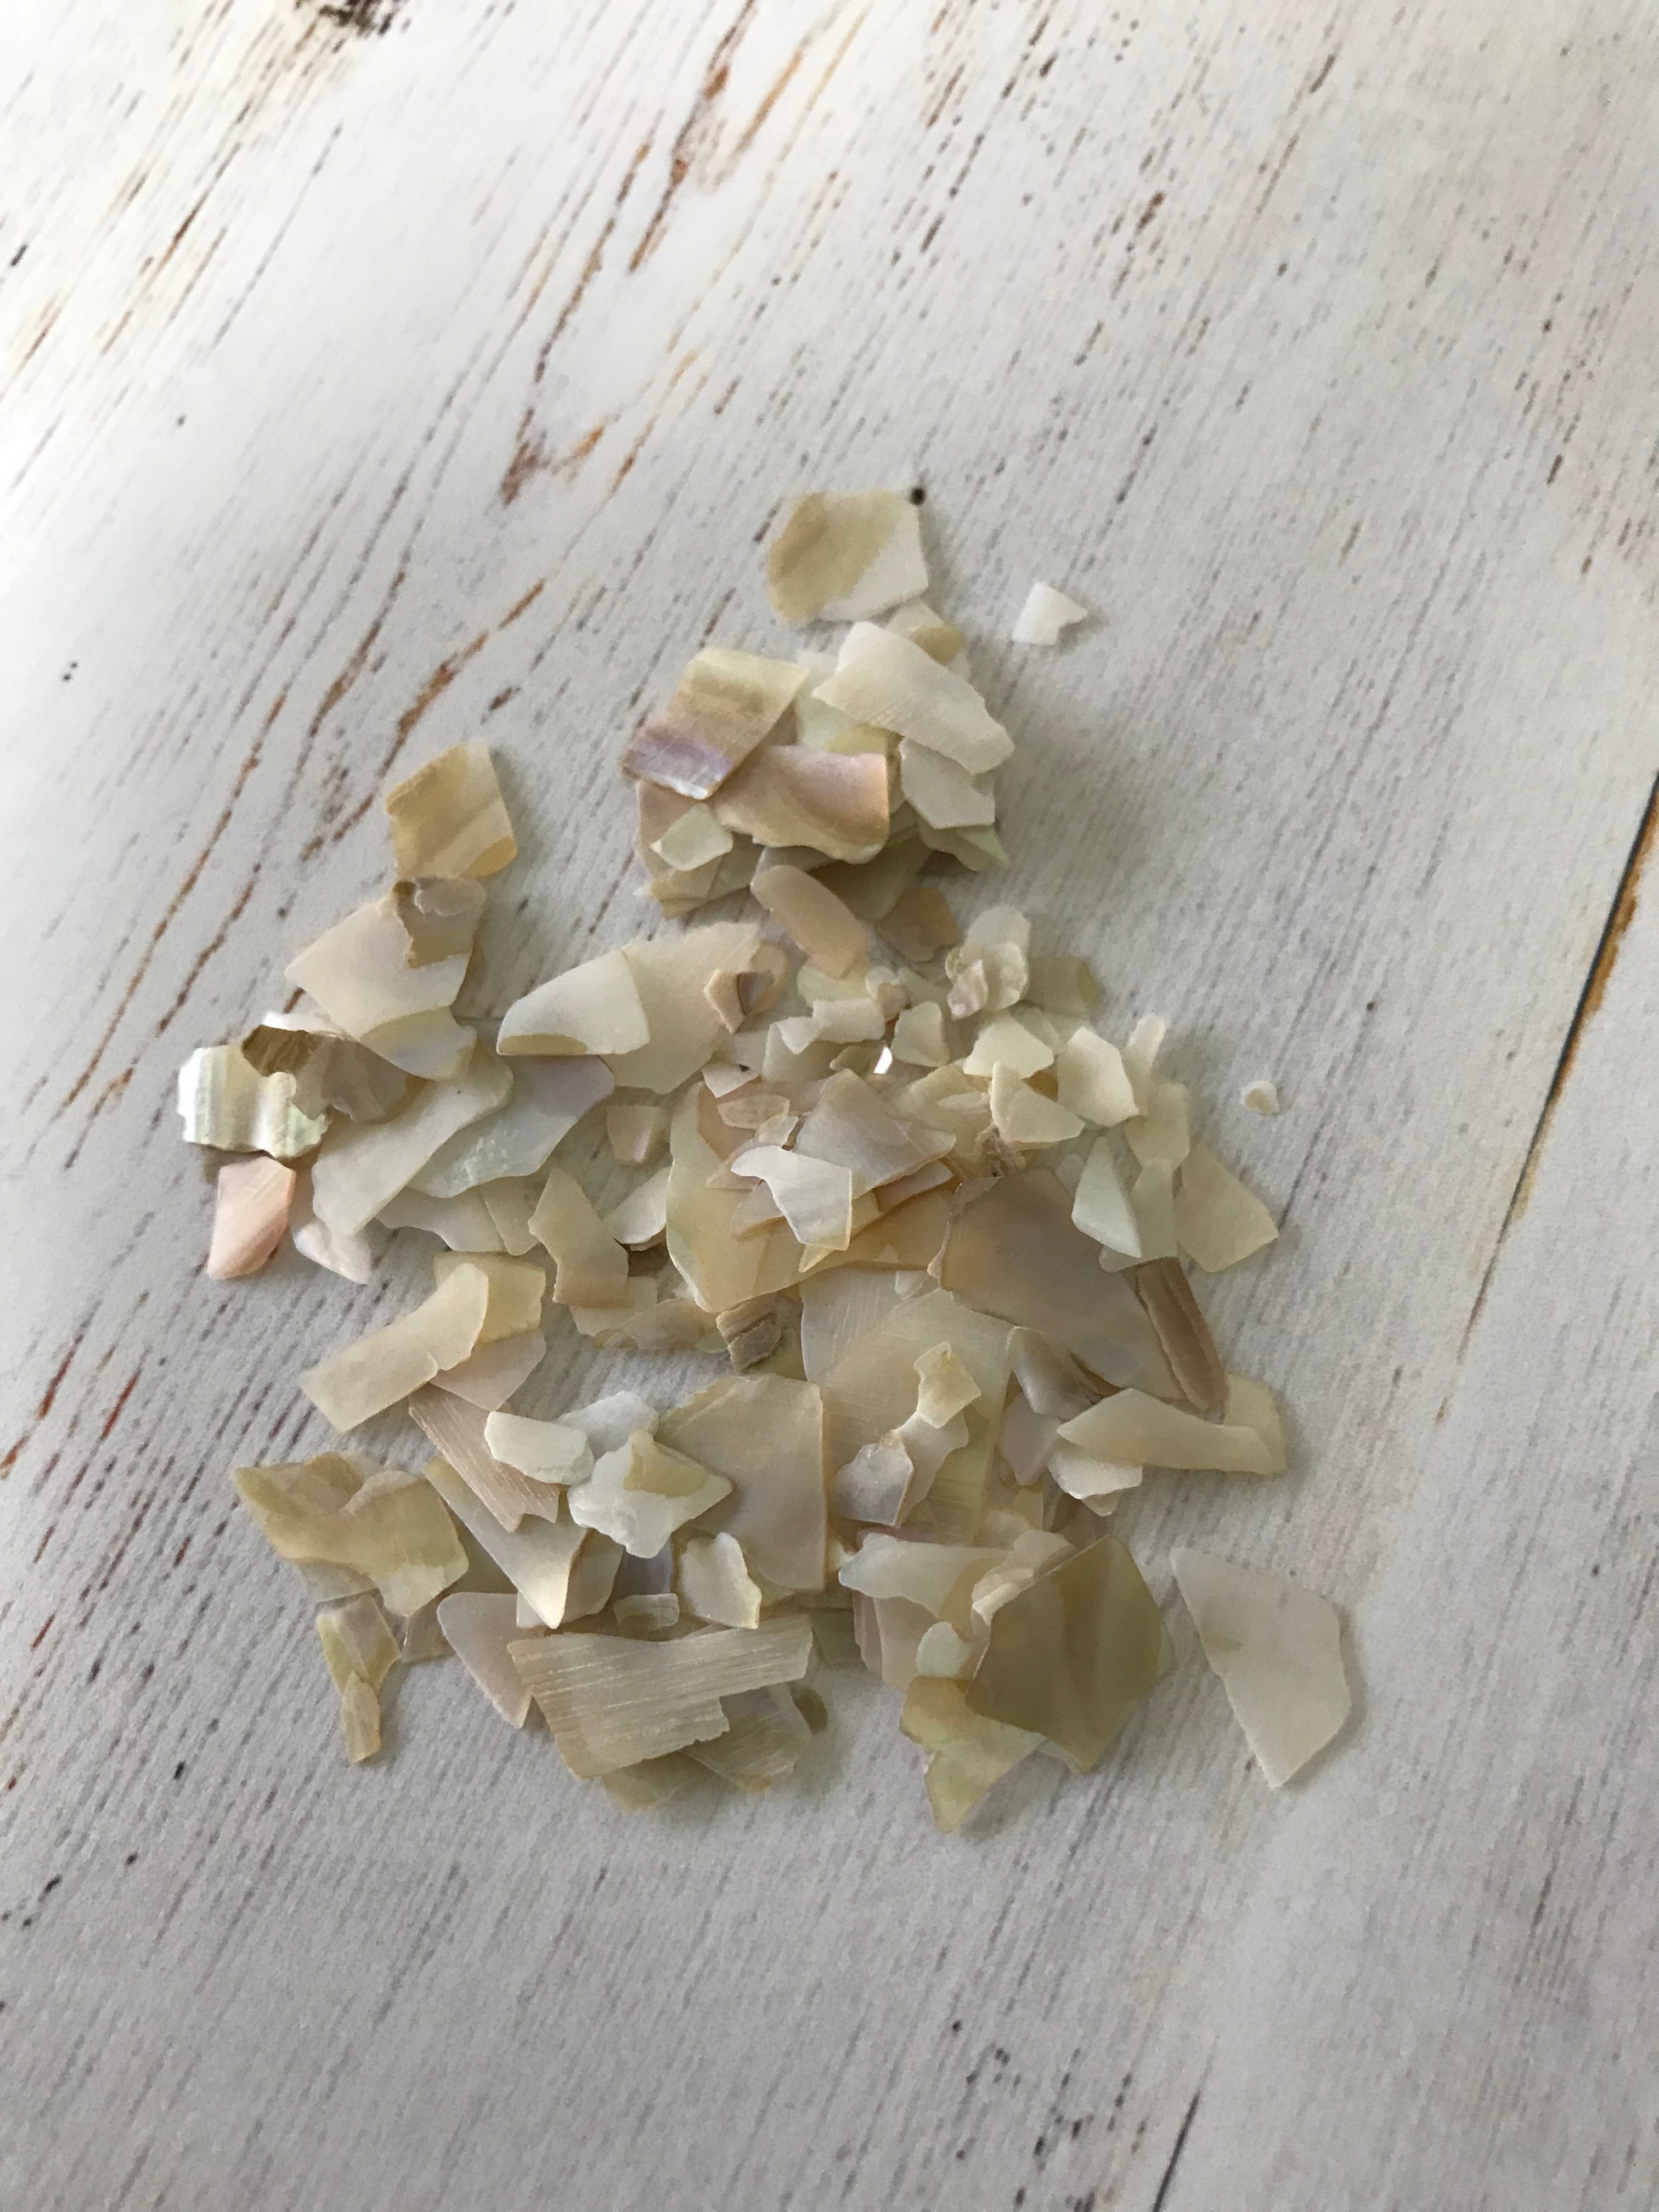 Shell Pieces 5 grams